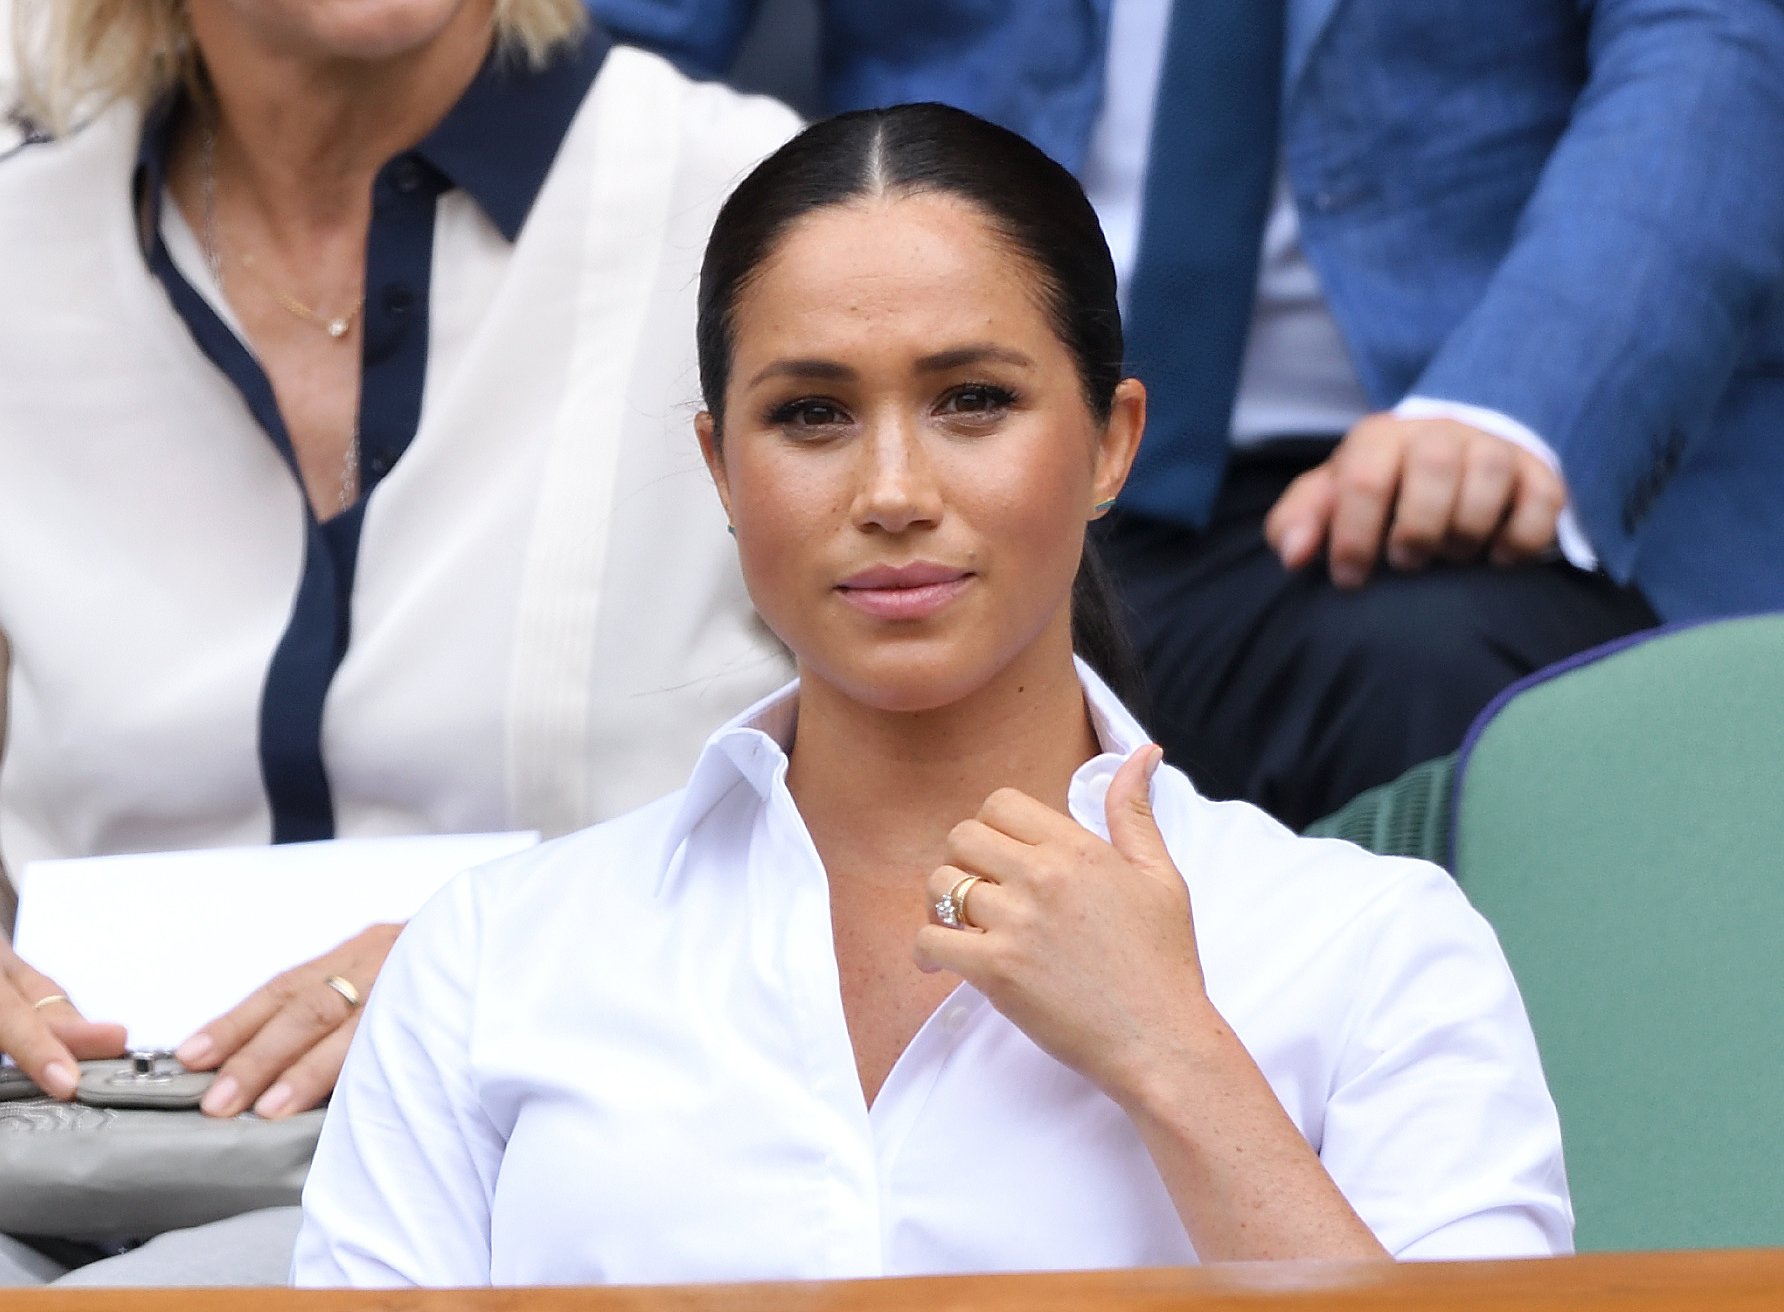 Meghan Markle during the Women's Singles Final of the Wimbledon Tennis Championships at All England Lawn Tennis and Croquet Club on July 13, 2019 in London, England. | Source: Getty Images